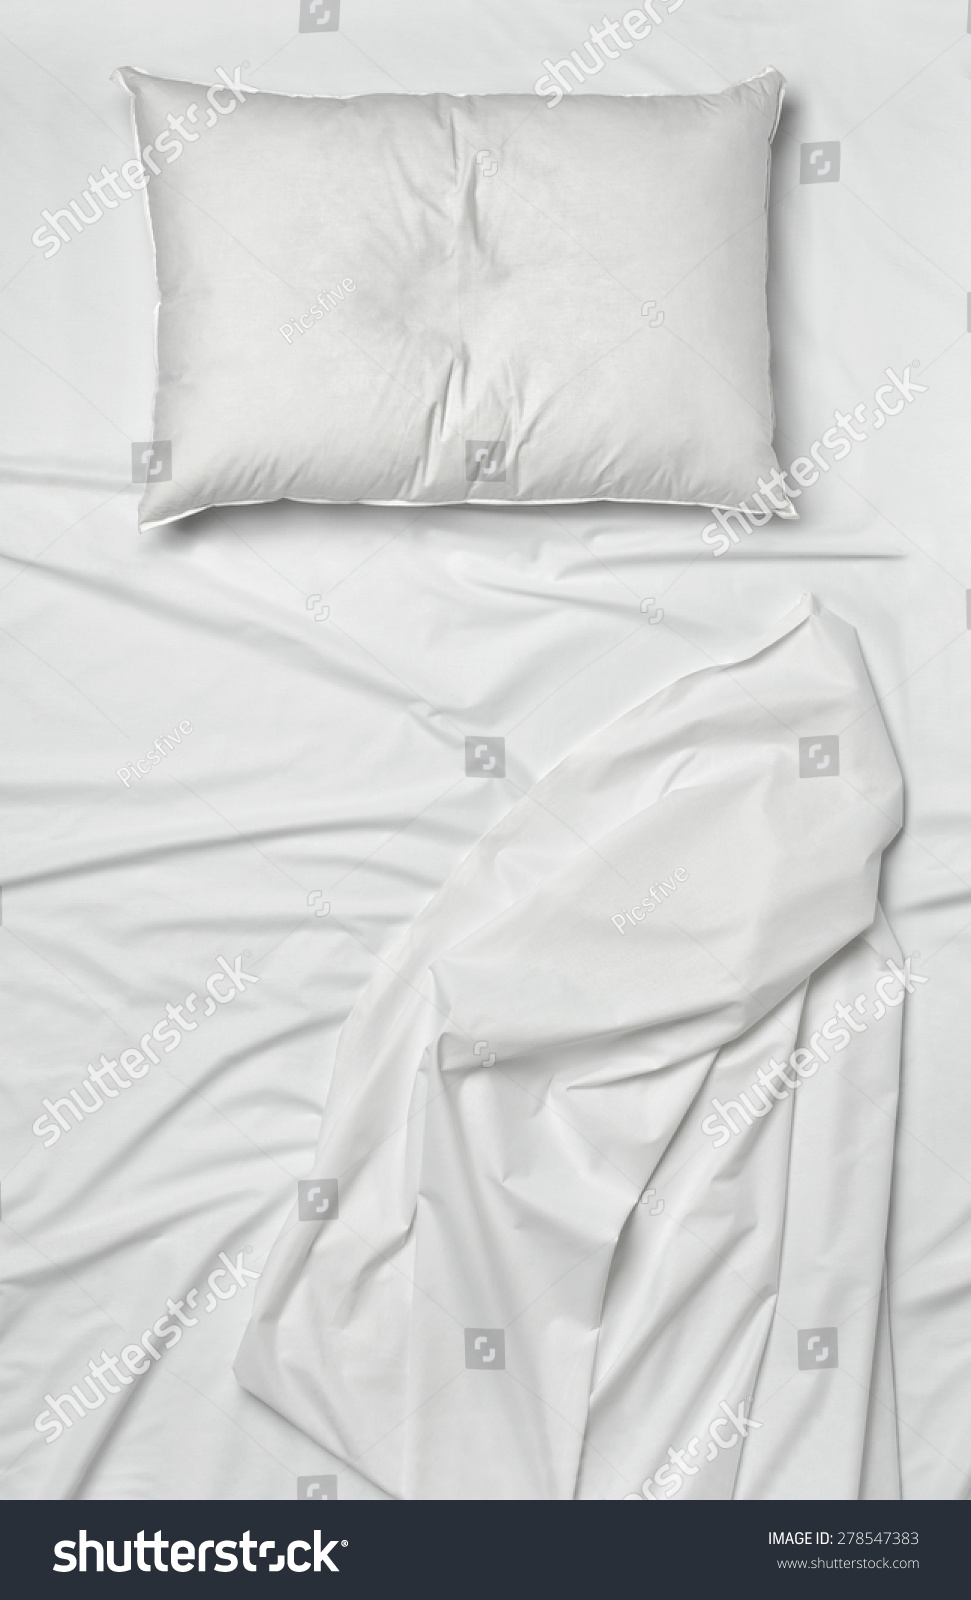 studio shot of bedding sheets and pillows #278547383